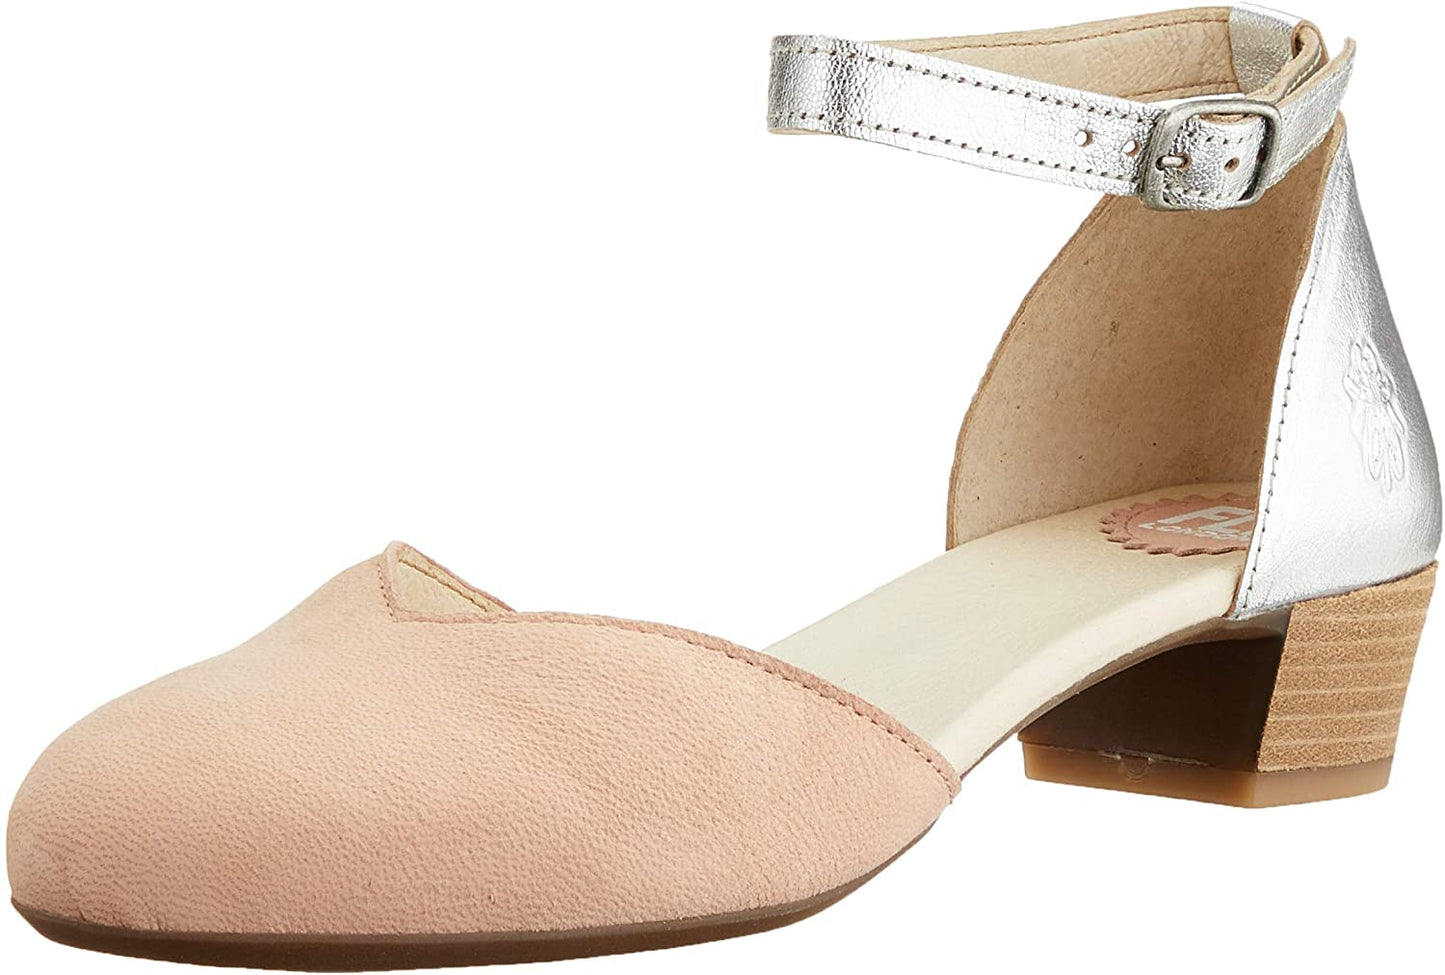 Fly London Women's LOGI459FLY Leather Ankle Strap Sandals Nude Pink Silver